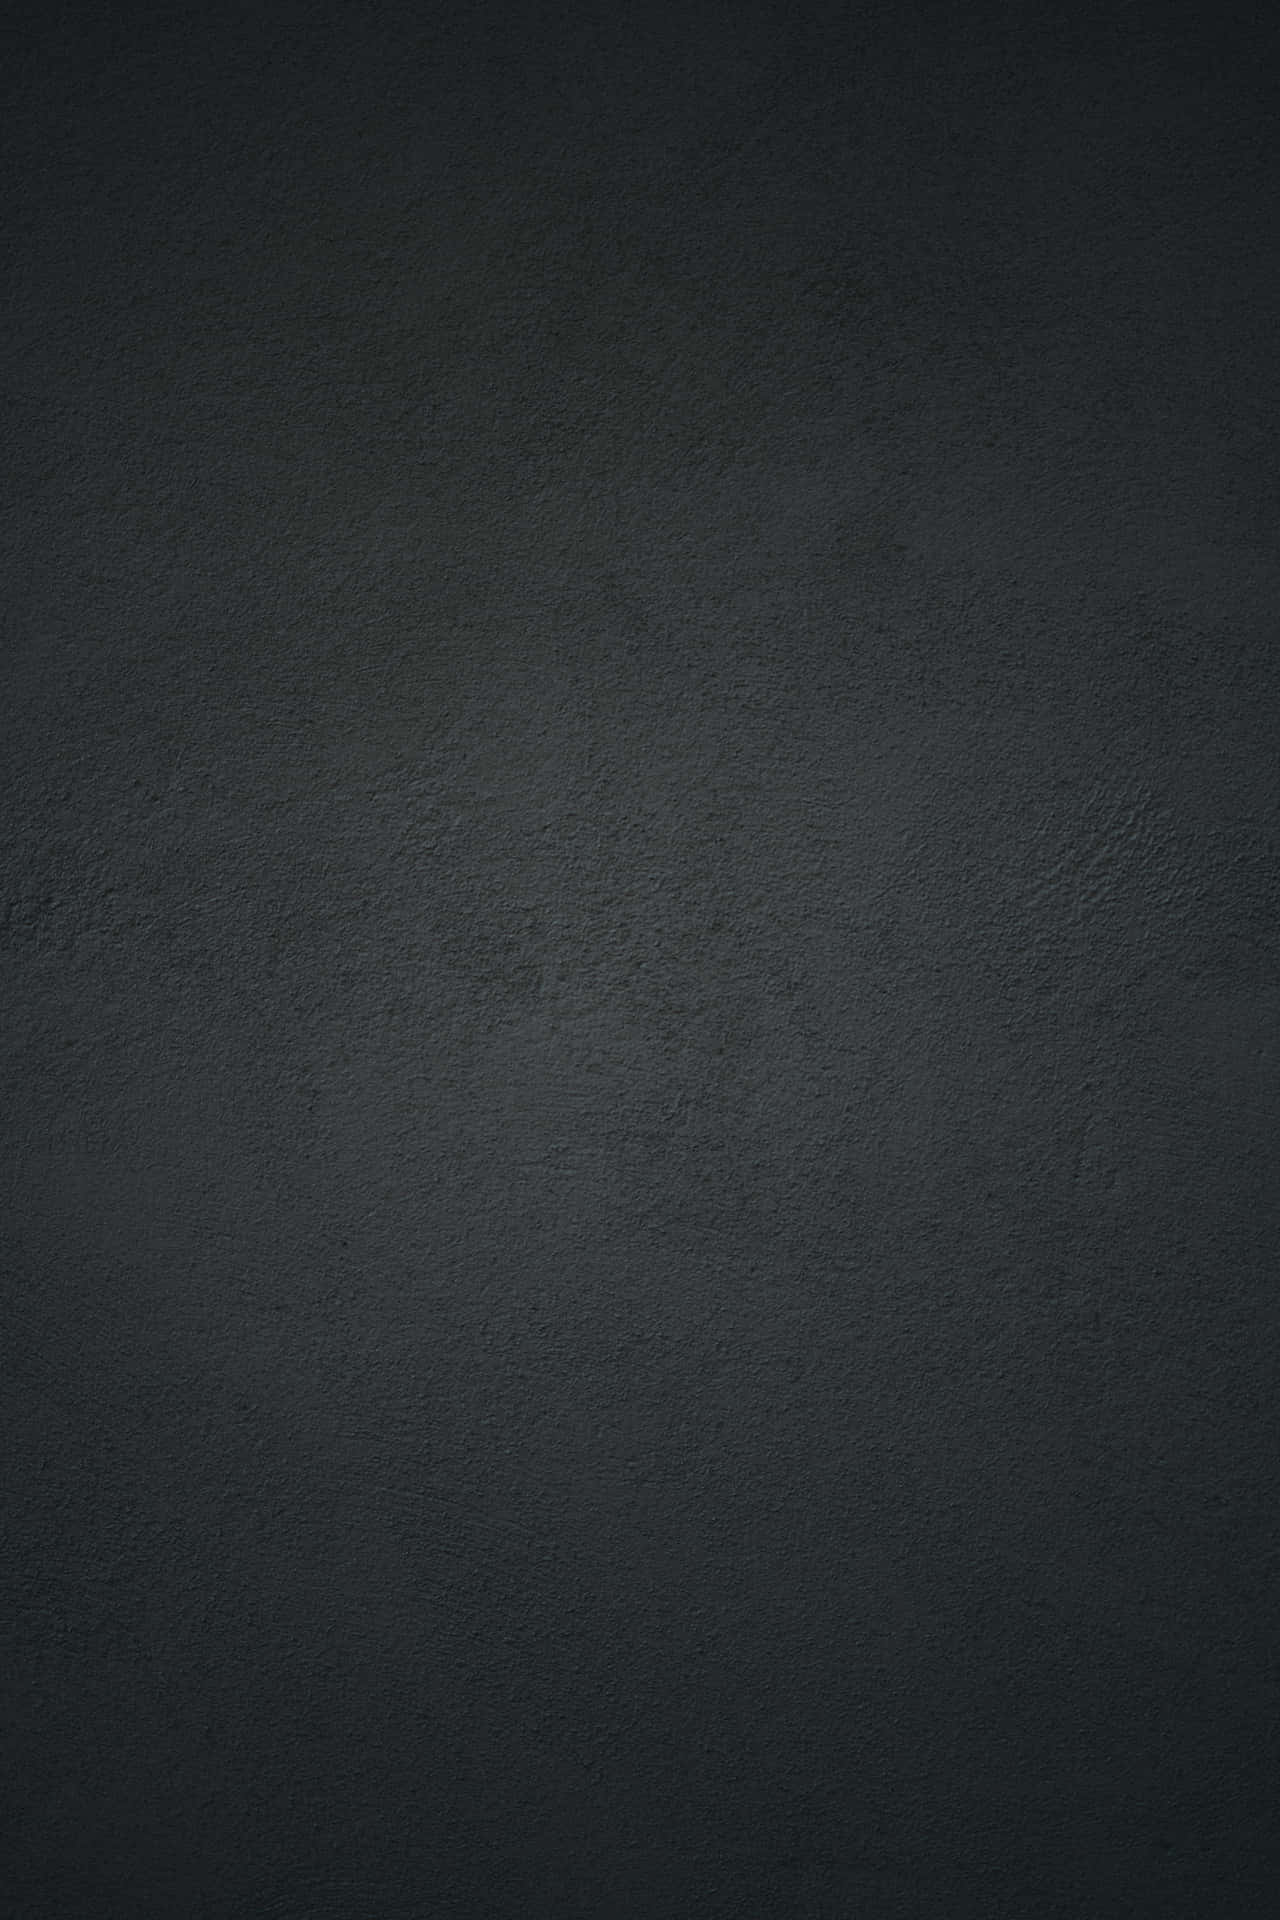 Black Concrete Wall Background With A Light Reflection Wallpaper